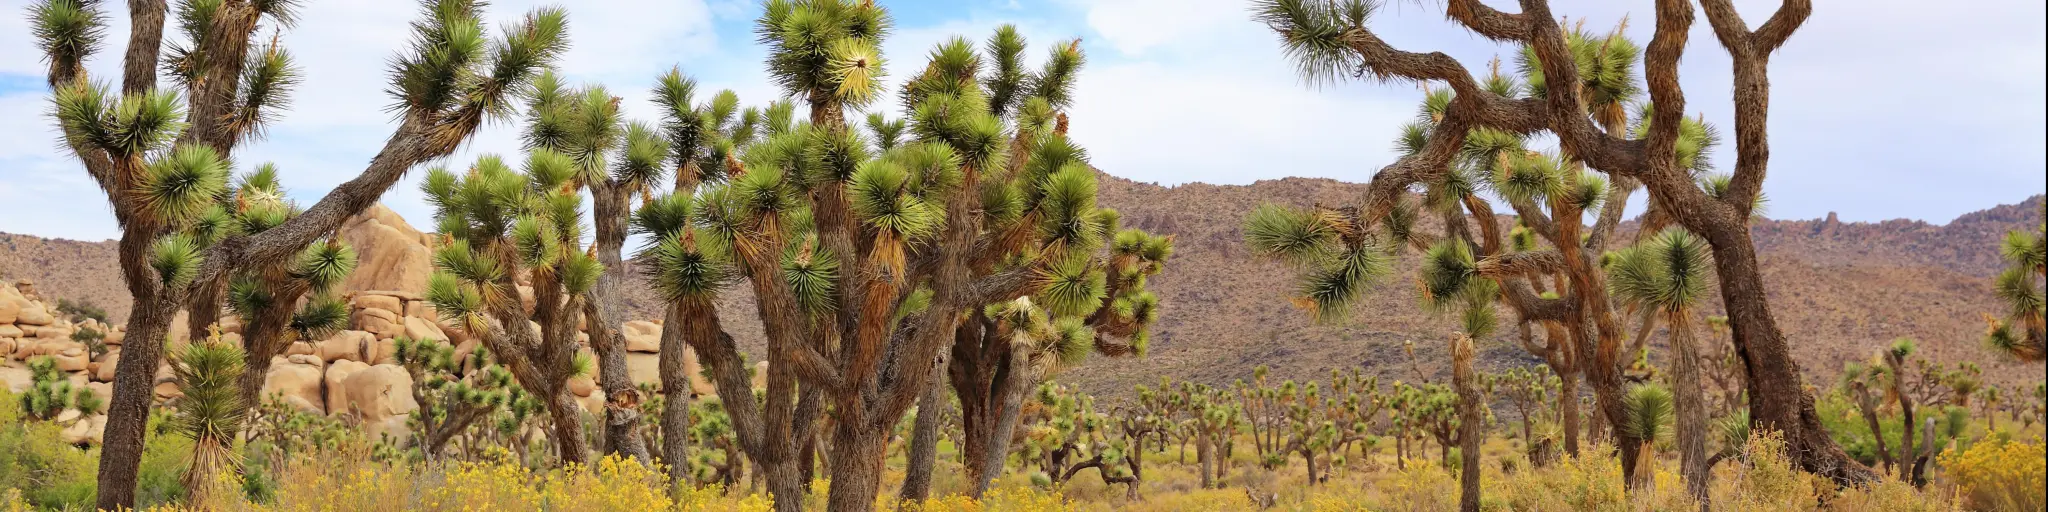 The Wall Street Mill Trail in Joshua Tree National Park is lined with the park's namesake trees.